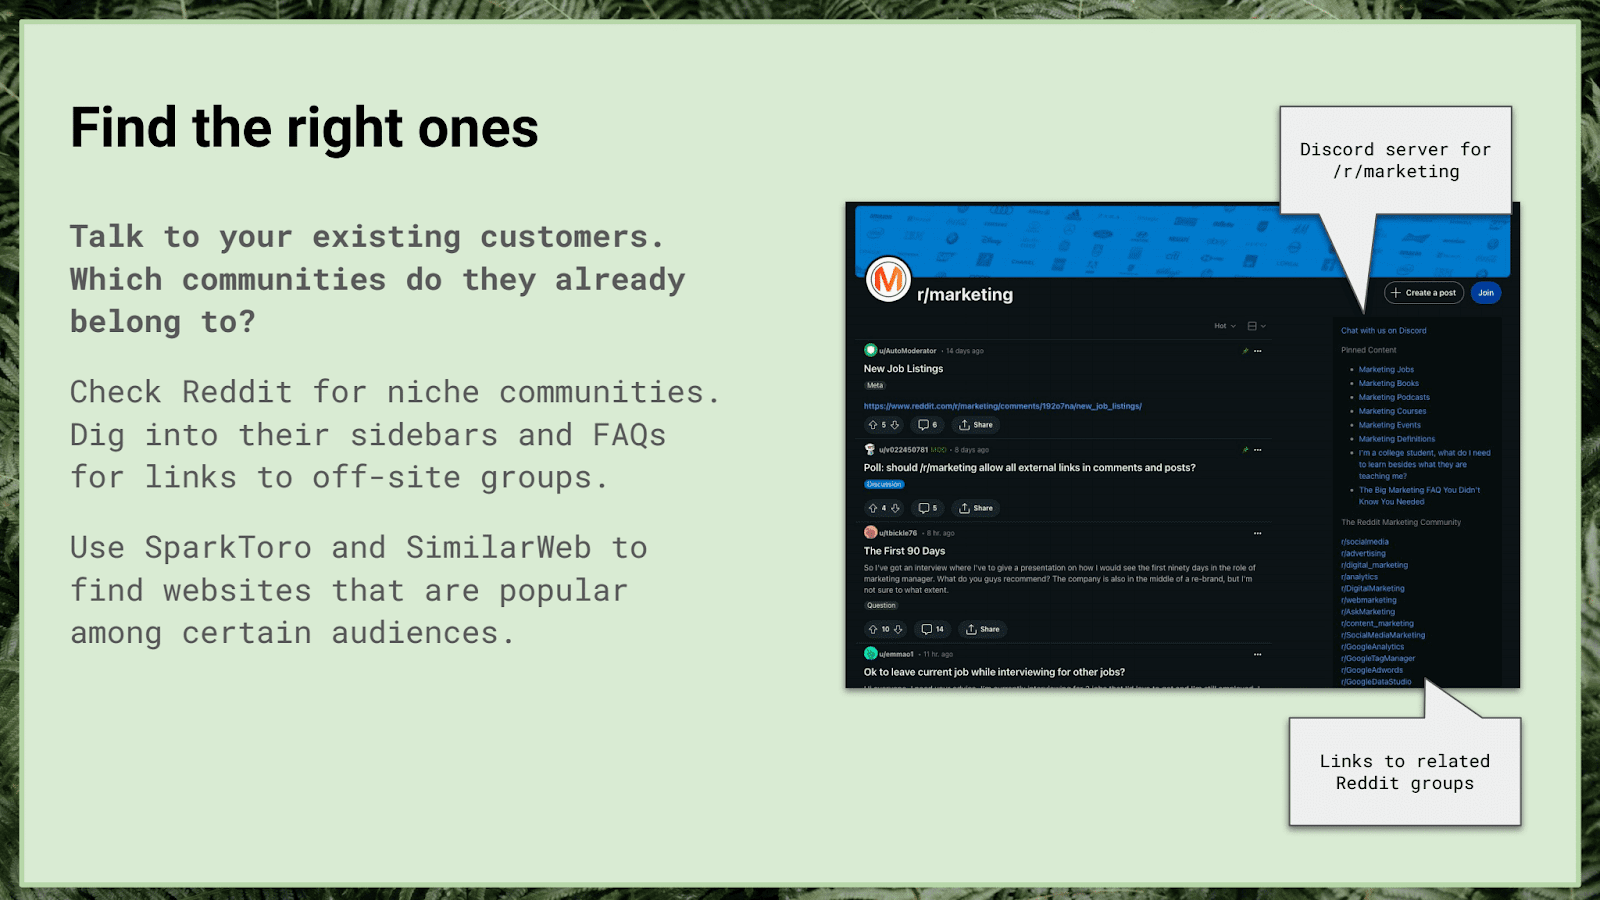 Find the right communities. Talk to existing customers to find out which communities they belong to. Check Reddit for niche communities, exploring sidebars and FAQs for off-site group links. Use SparkToro and SimilarWeb to discover popular websites among specific audiences. A screenshot of the r/marketing subreddit is shown, highlighting its Discord server and links to related Reddit groups.